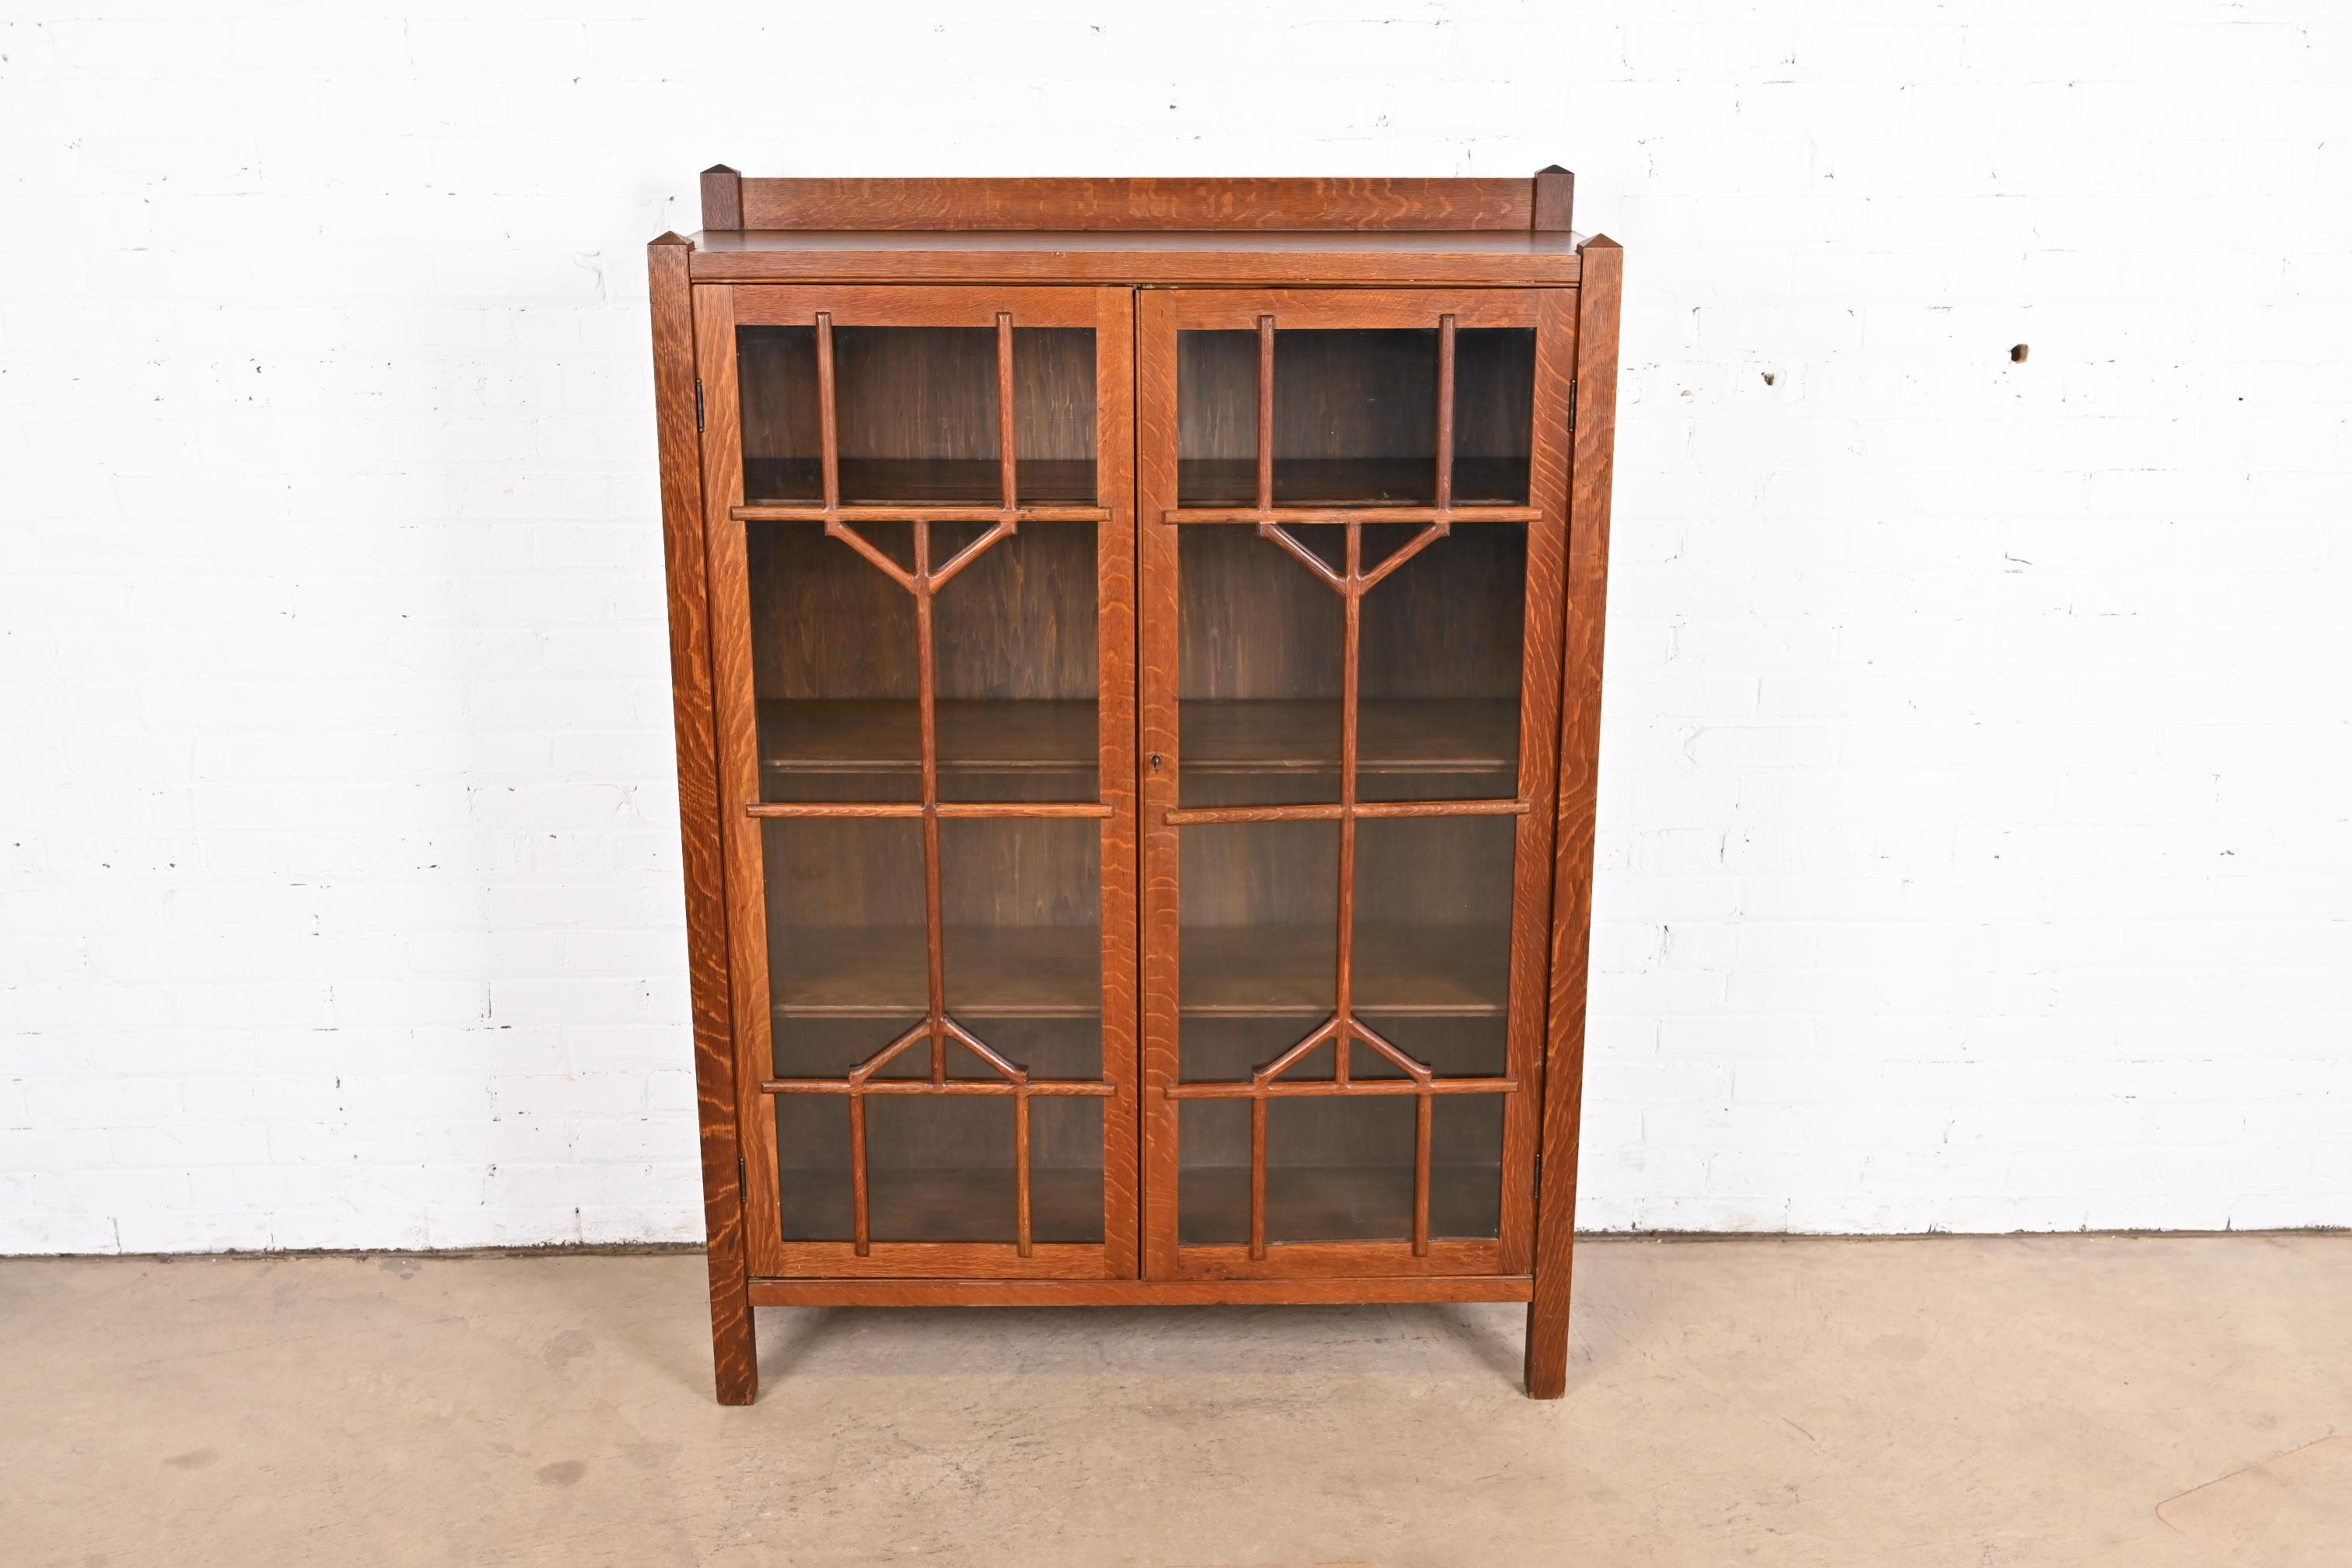 A gorgeous antique Mission or Arts & Crafts bookcase cabinet

In the manner of Stickley Brothers

USA, Circa 1910

Quarter sawn oak, with mullioned glass front doors. Cabinet locks, and key is included.

Measures: 41.5